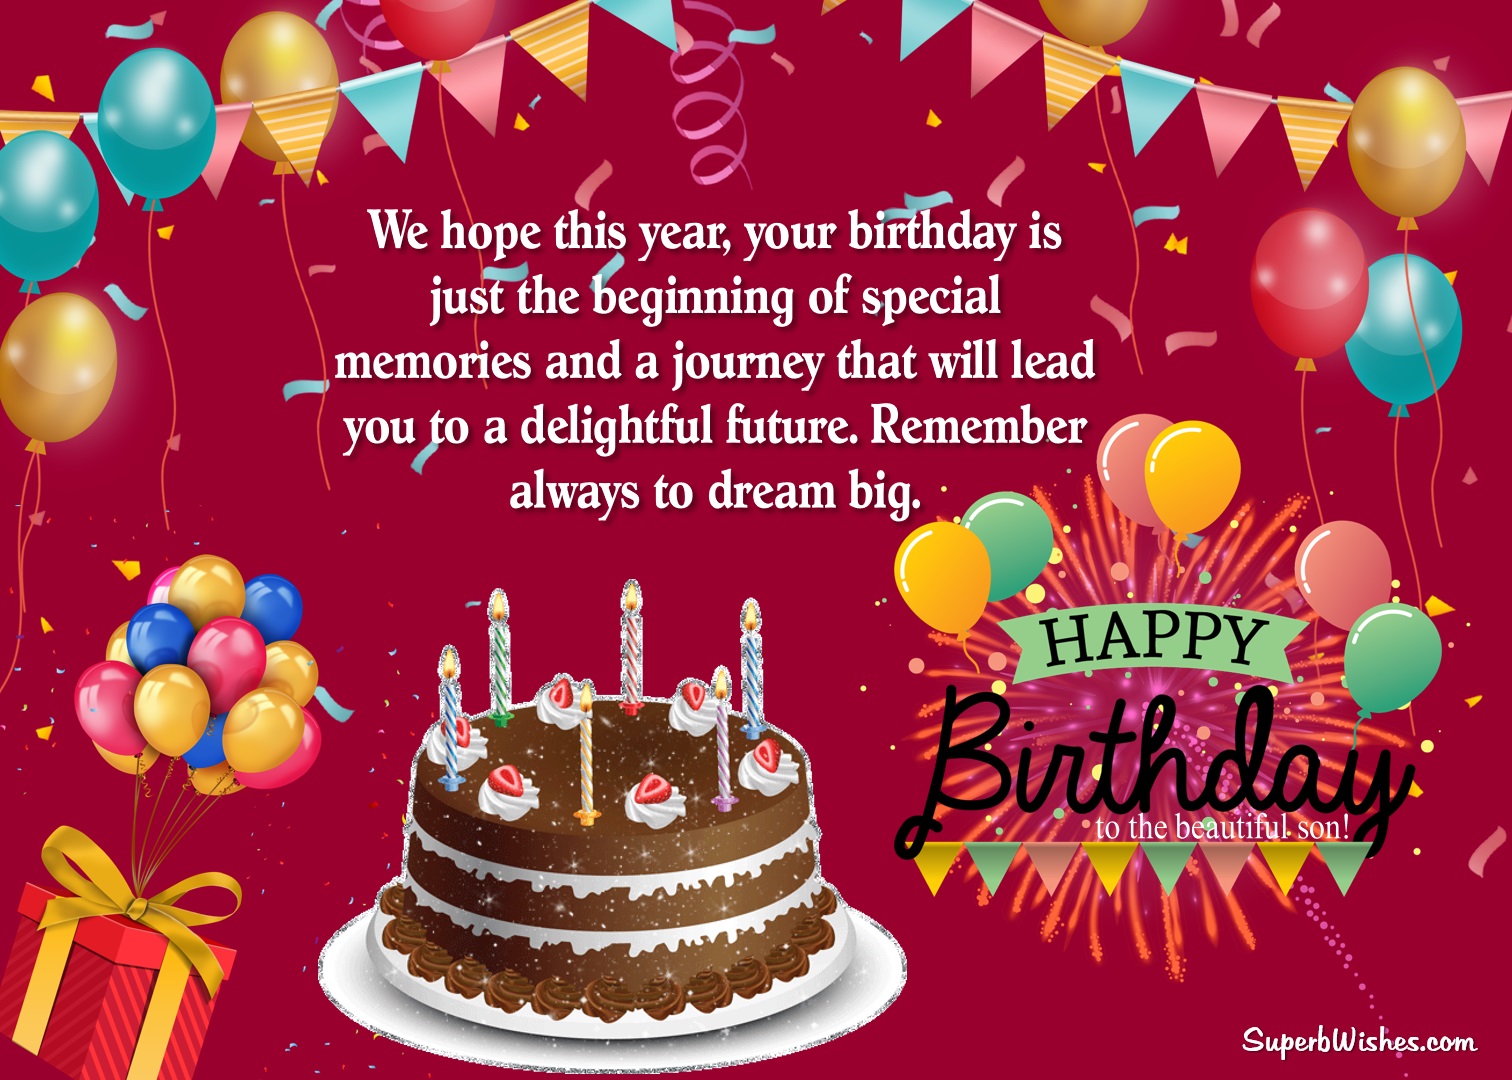 We hope this year, your birthday is just the beginning of special memories and a journey that will lead you to a delightful future. Superbwishes.com